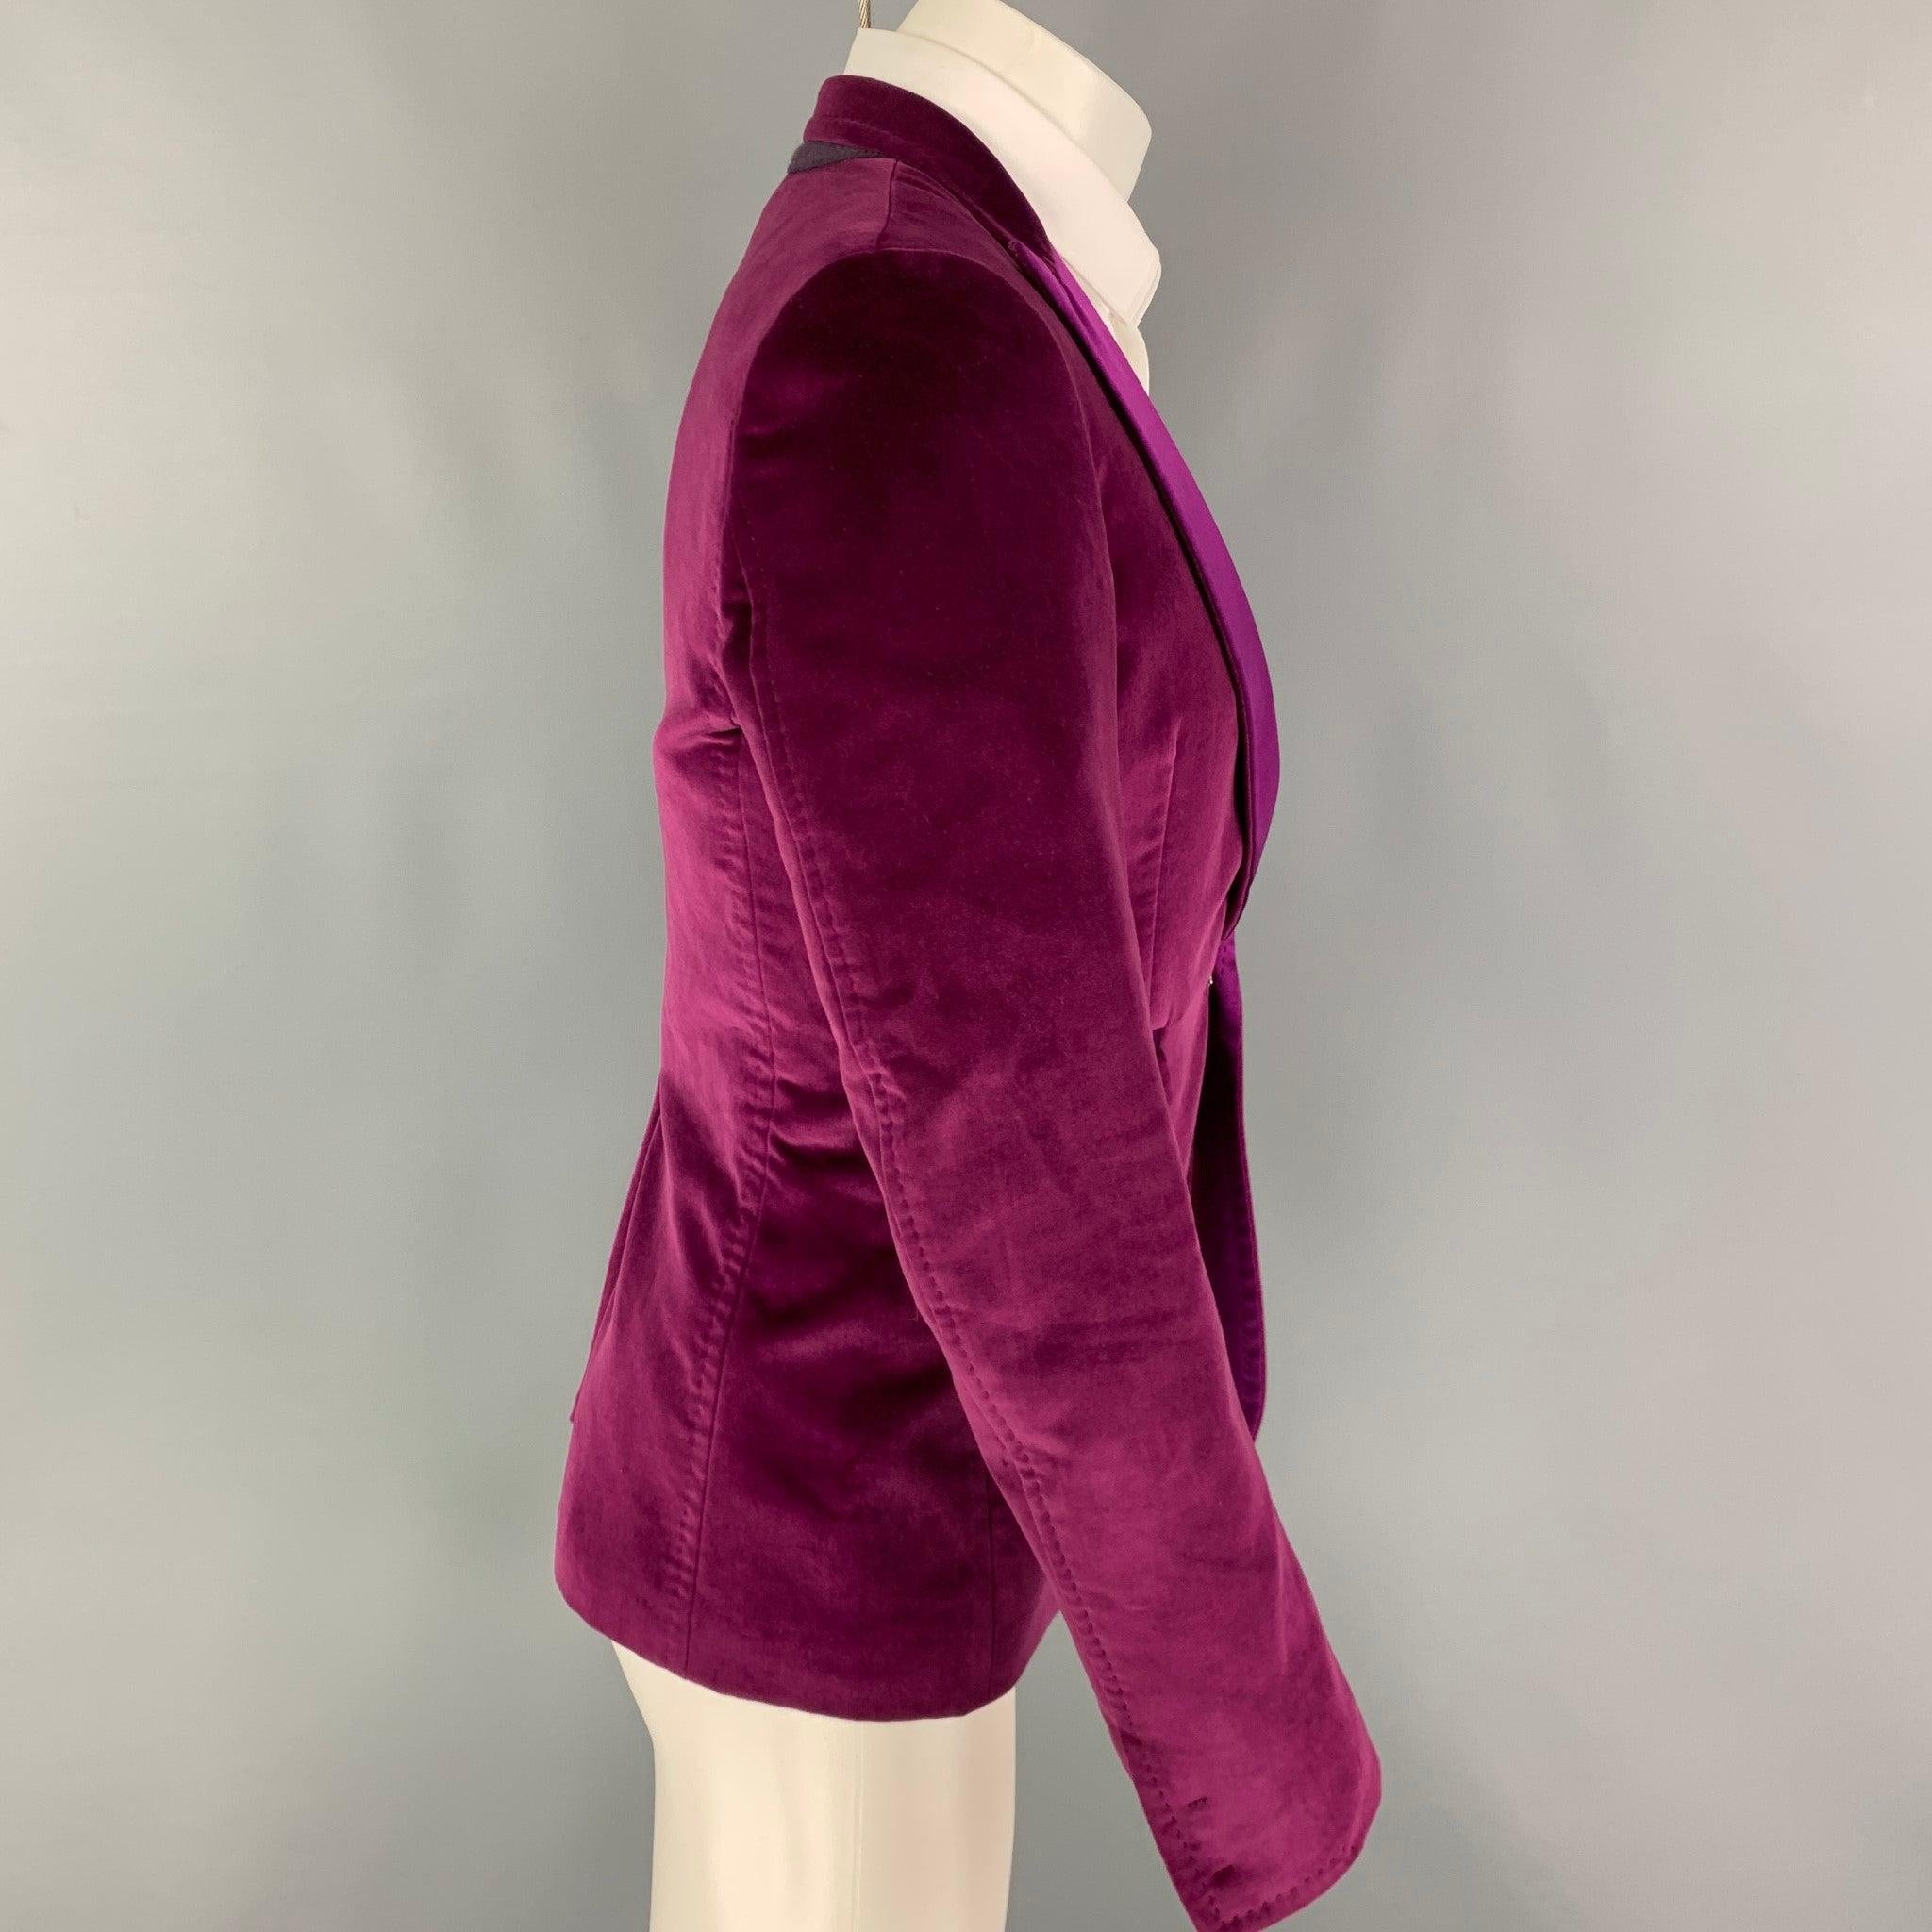 DSQUARED2 sport coat comes in a magenta cotton velvet with a full liner featuring a peak lapel, flap pockets, single back vent, and a front tab closure. Made in Italy.
Very Good
Pre-Owned Condition. 

Marked:   46 

Measurements: 
 
Shoulder: 16